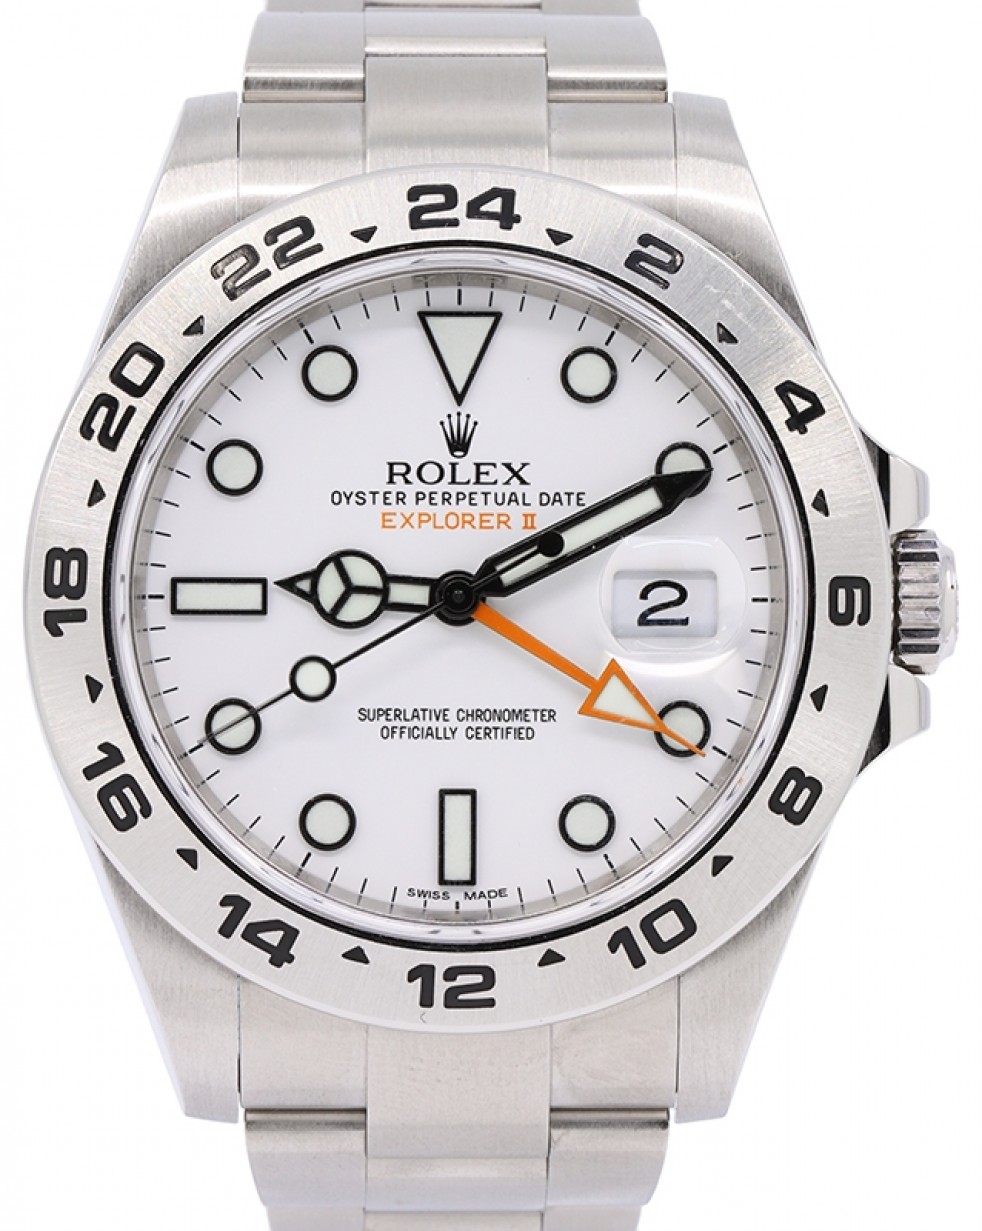 Rolex Explorer II 216570 Men's 42mm White GMT Stainless Steel Steve McQueen  Oyster BOX PAPERS